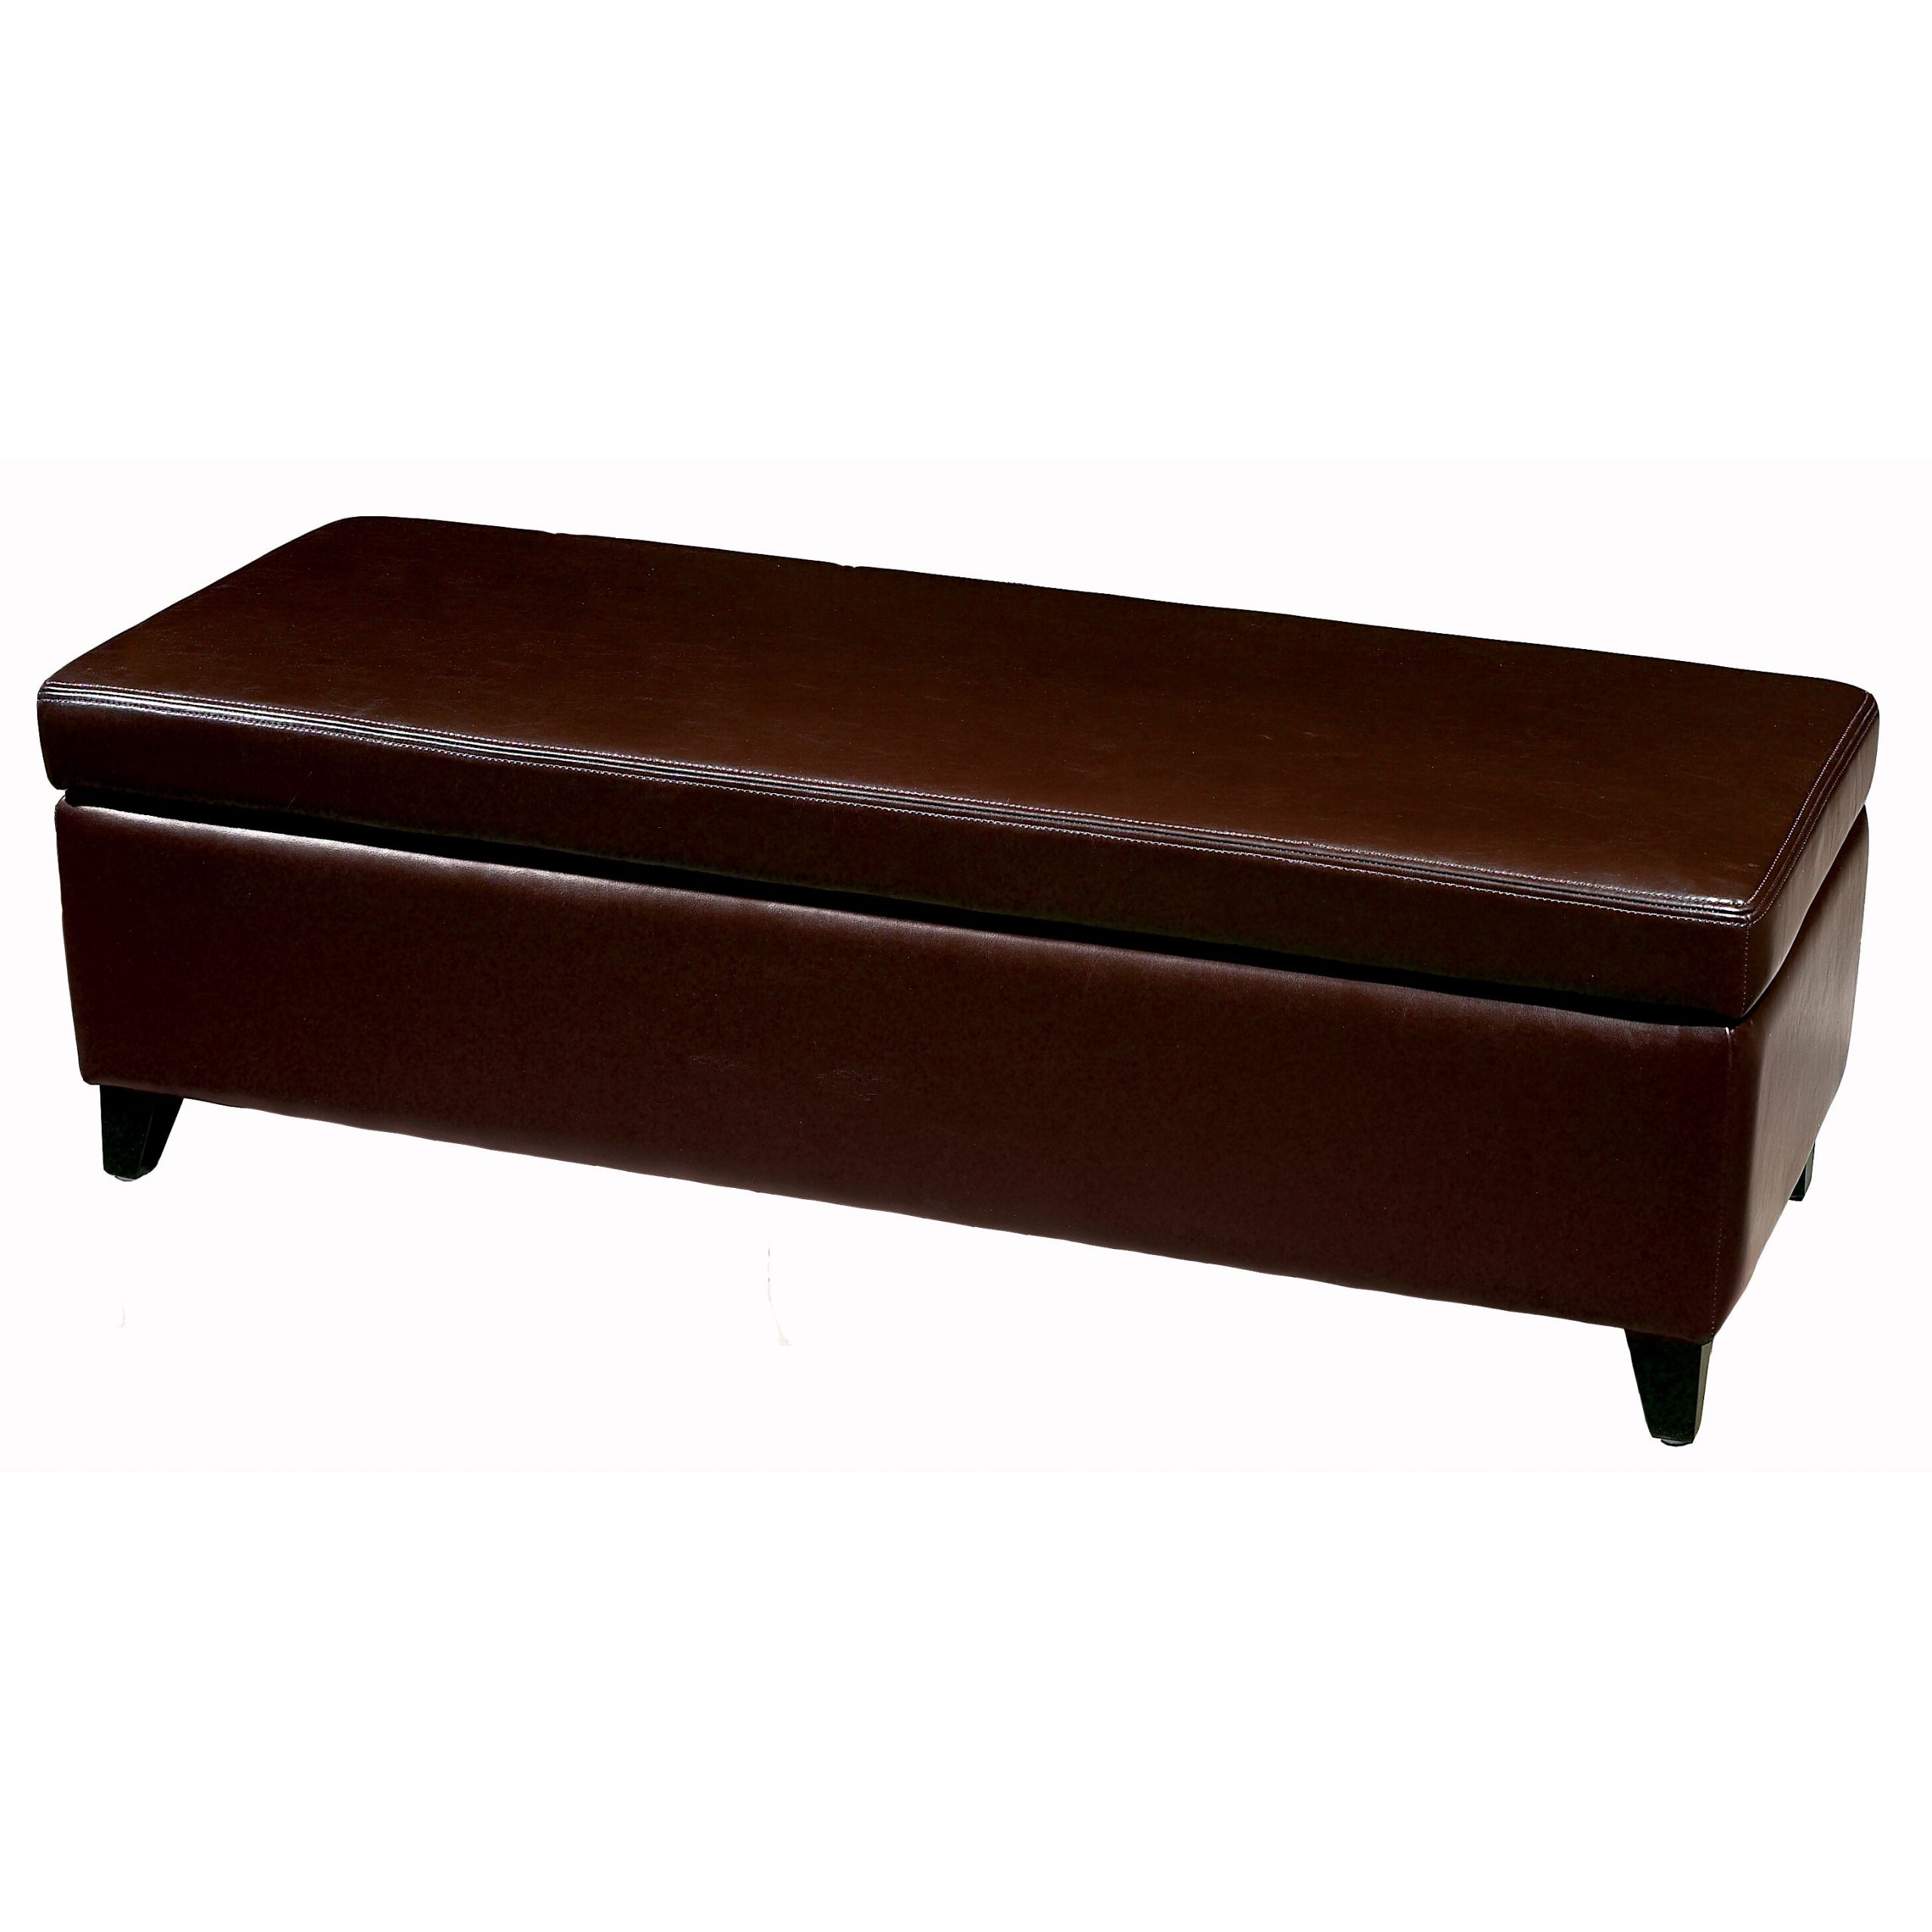 Leather Bench With Storage
 Wholesale Interiors Baxton Studio Leather Storage Bench